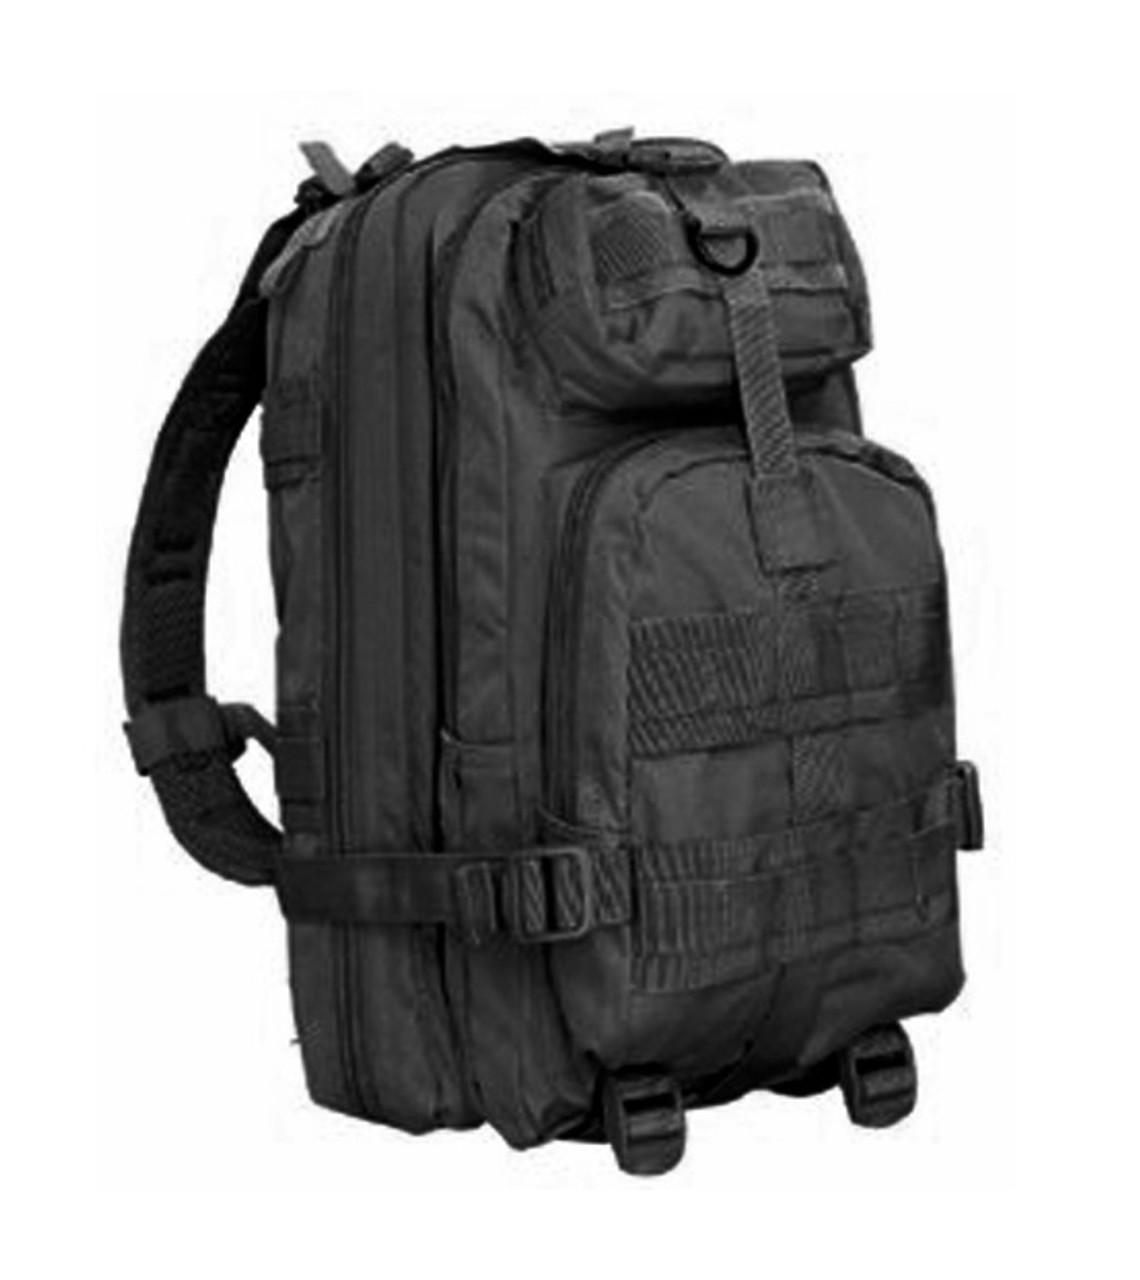 Condor Small Assault Pack - Black | Military Luggage